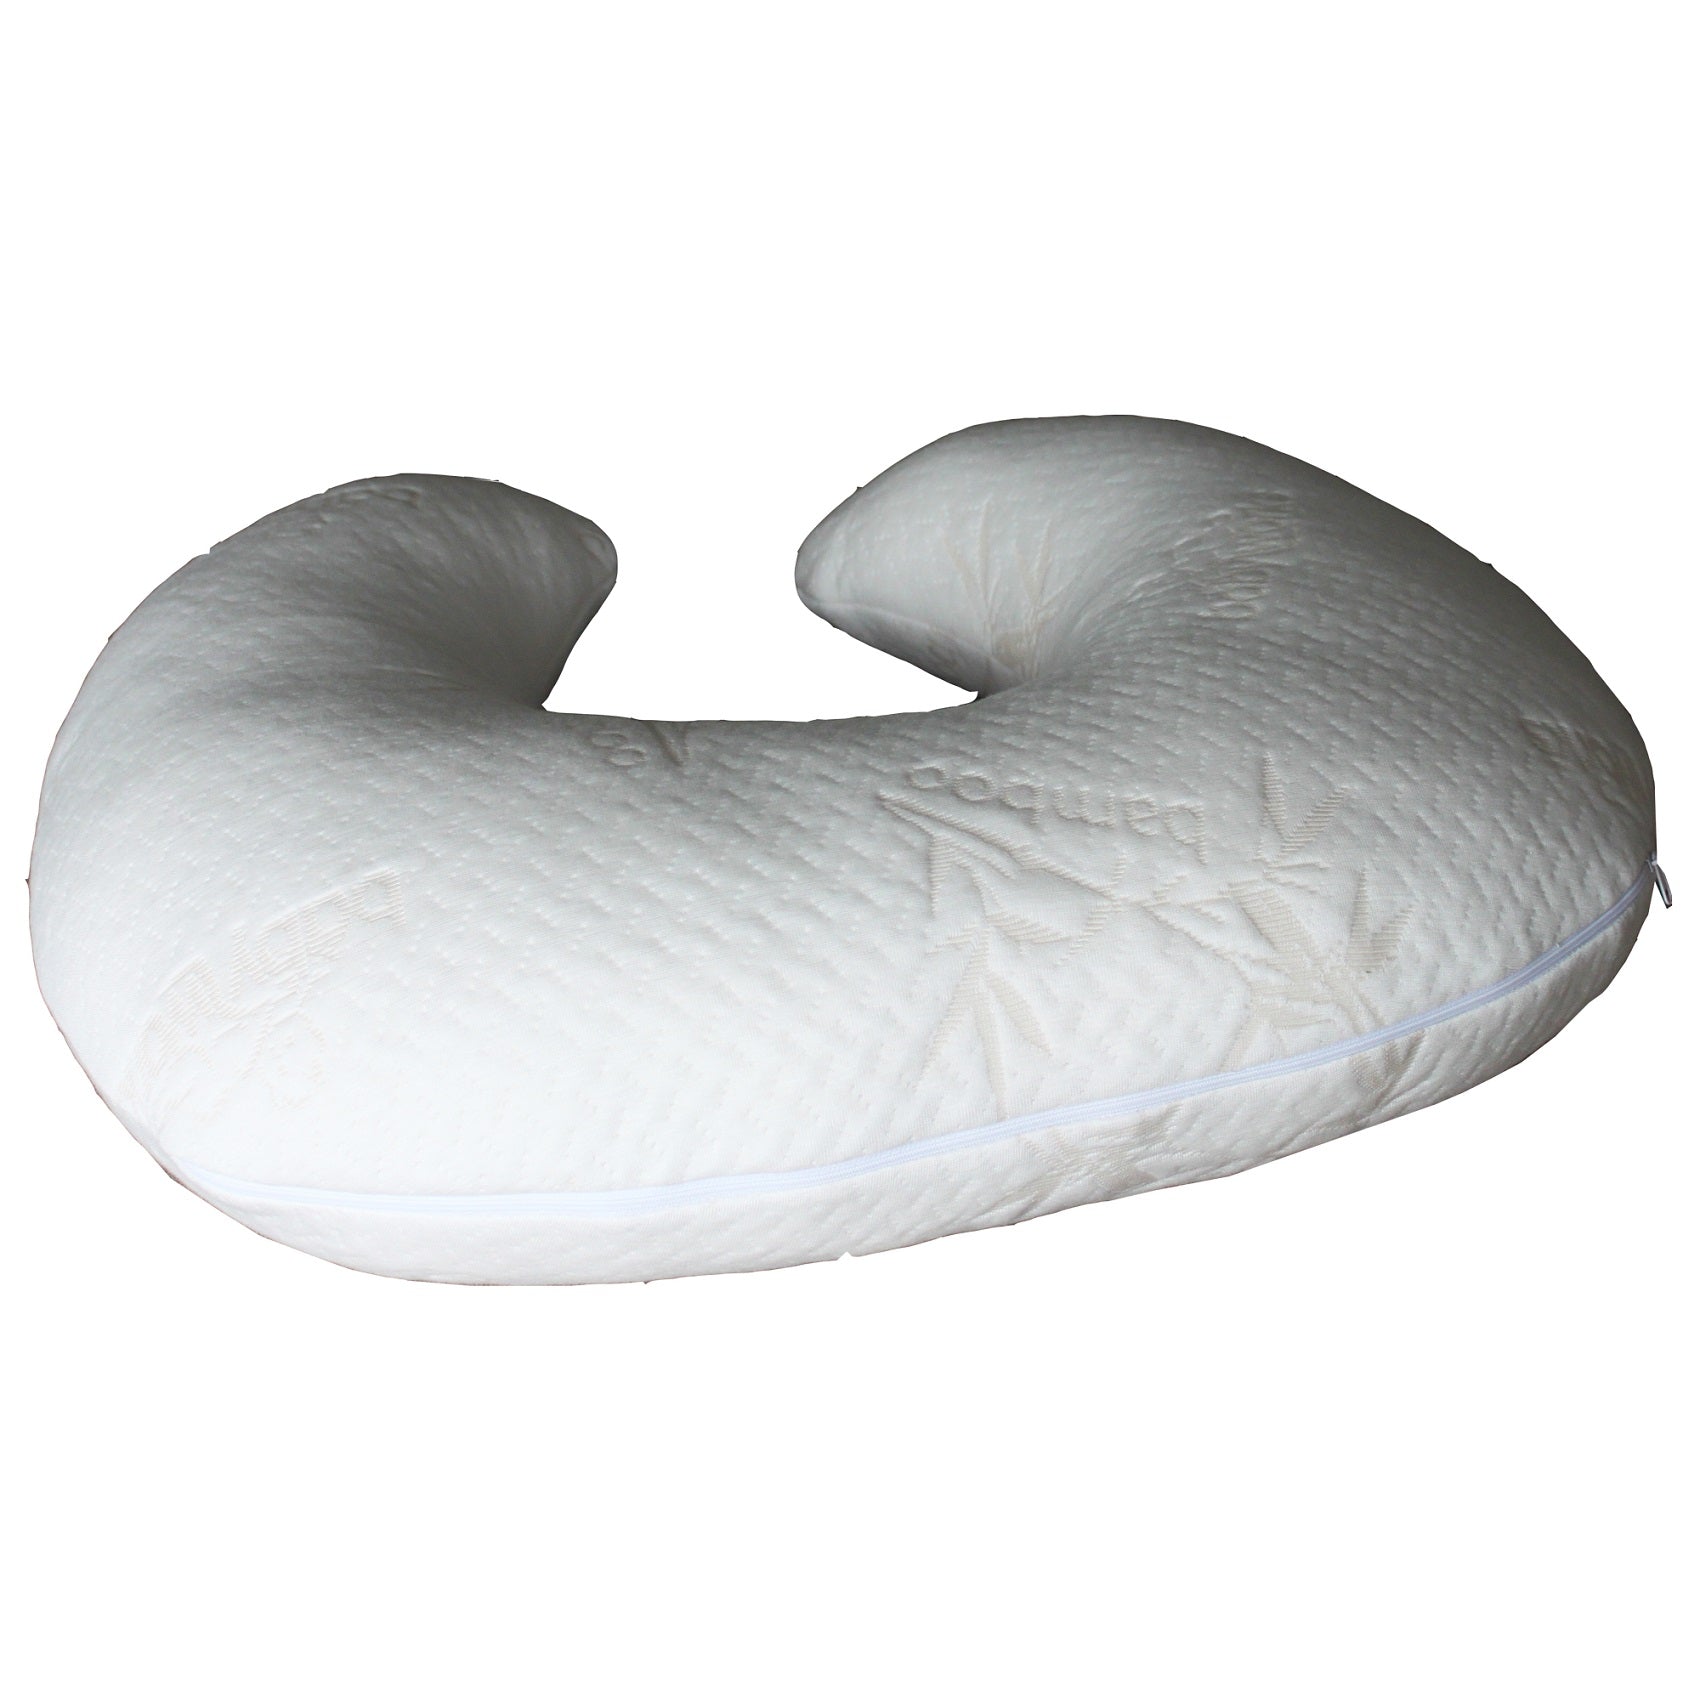 Baby Works - Feeding Pillow With Memory Foam Top & Bottom Layer & Bamboo Pillowcase (White)